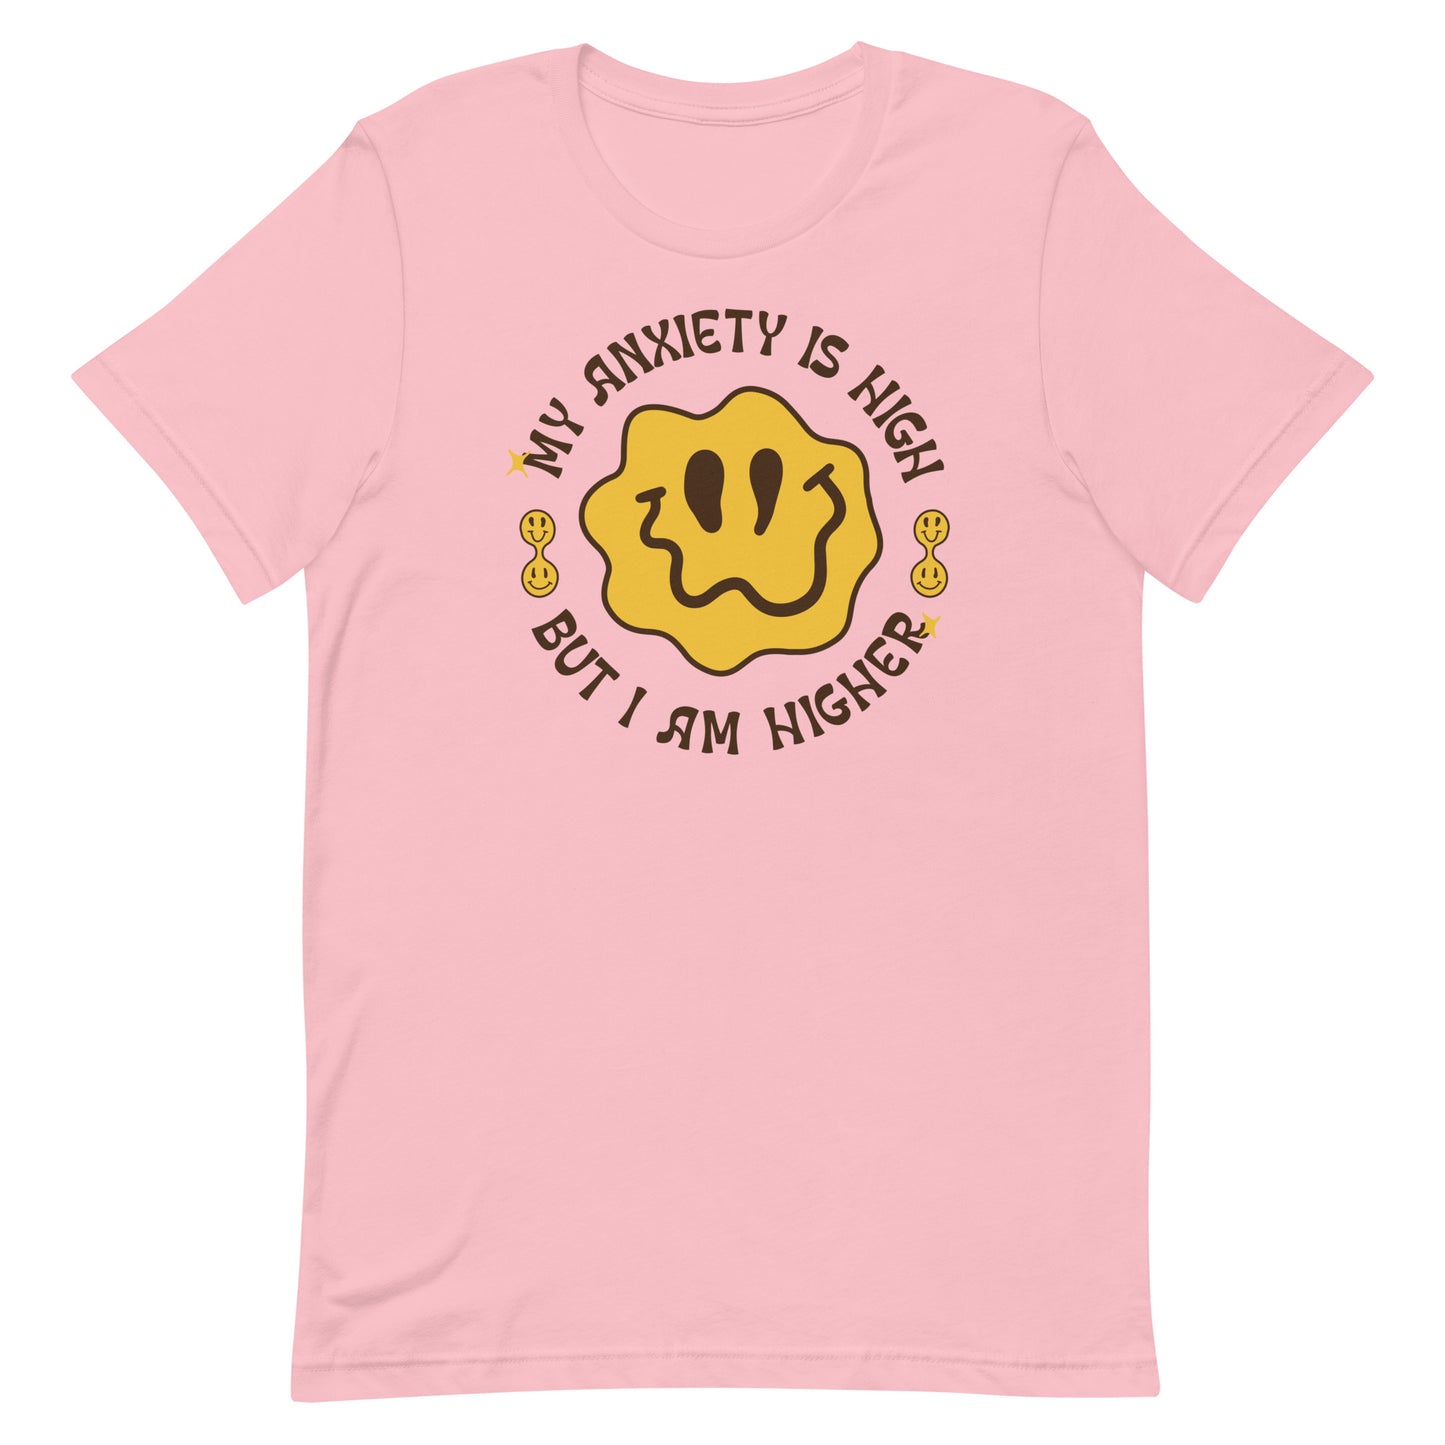 My Anxiety is High But I Am Higher Unisex t-shirt